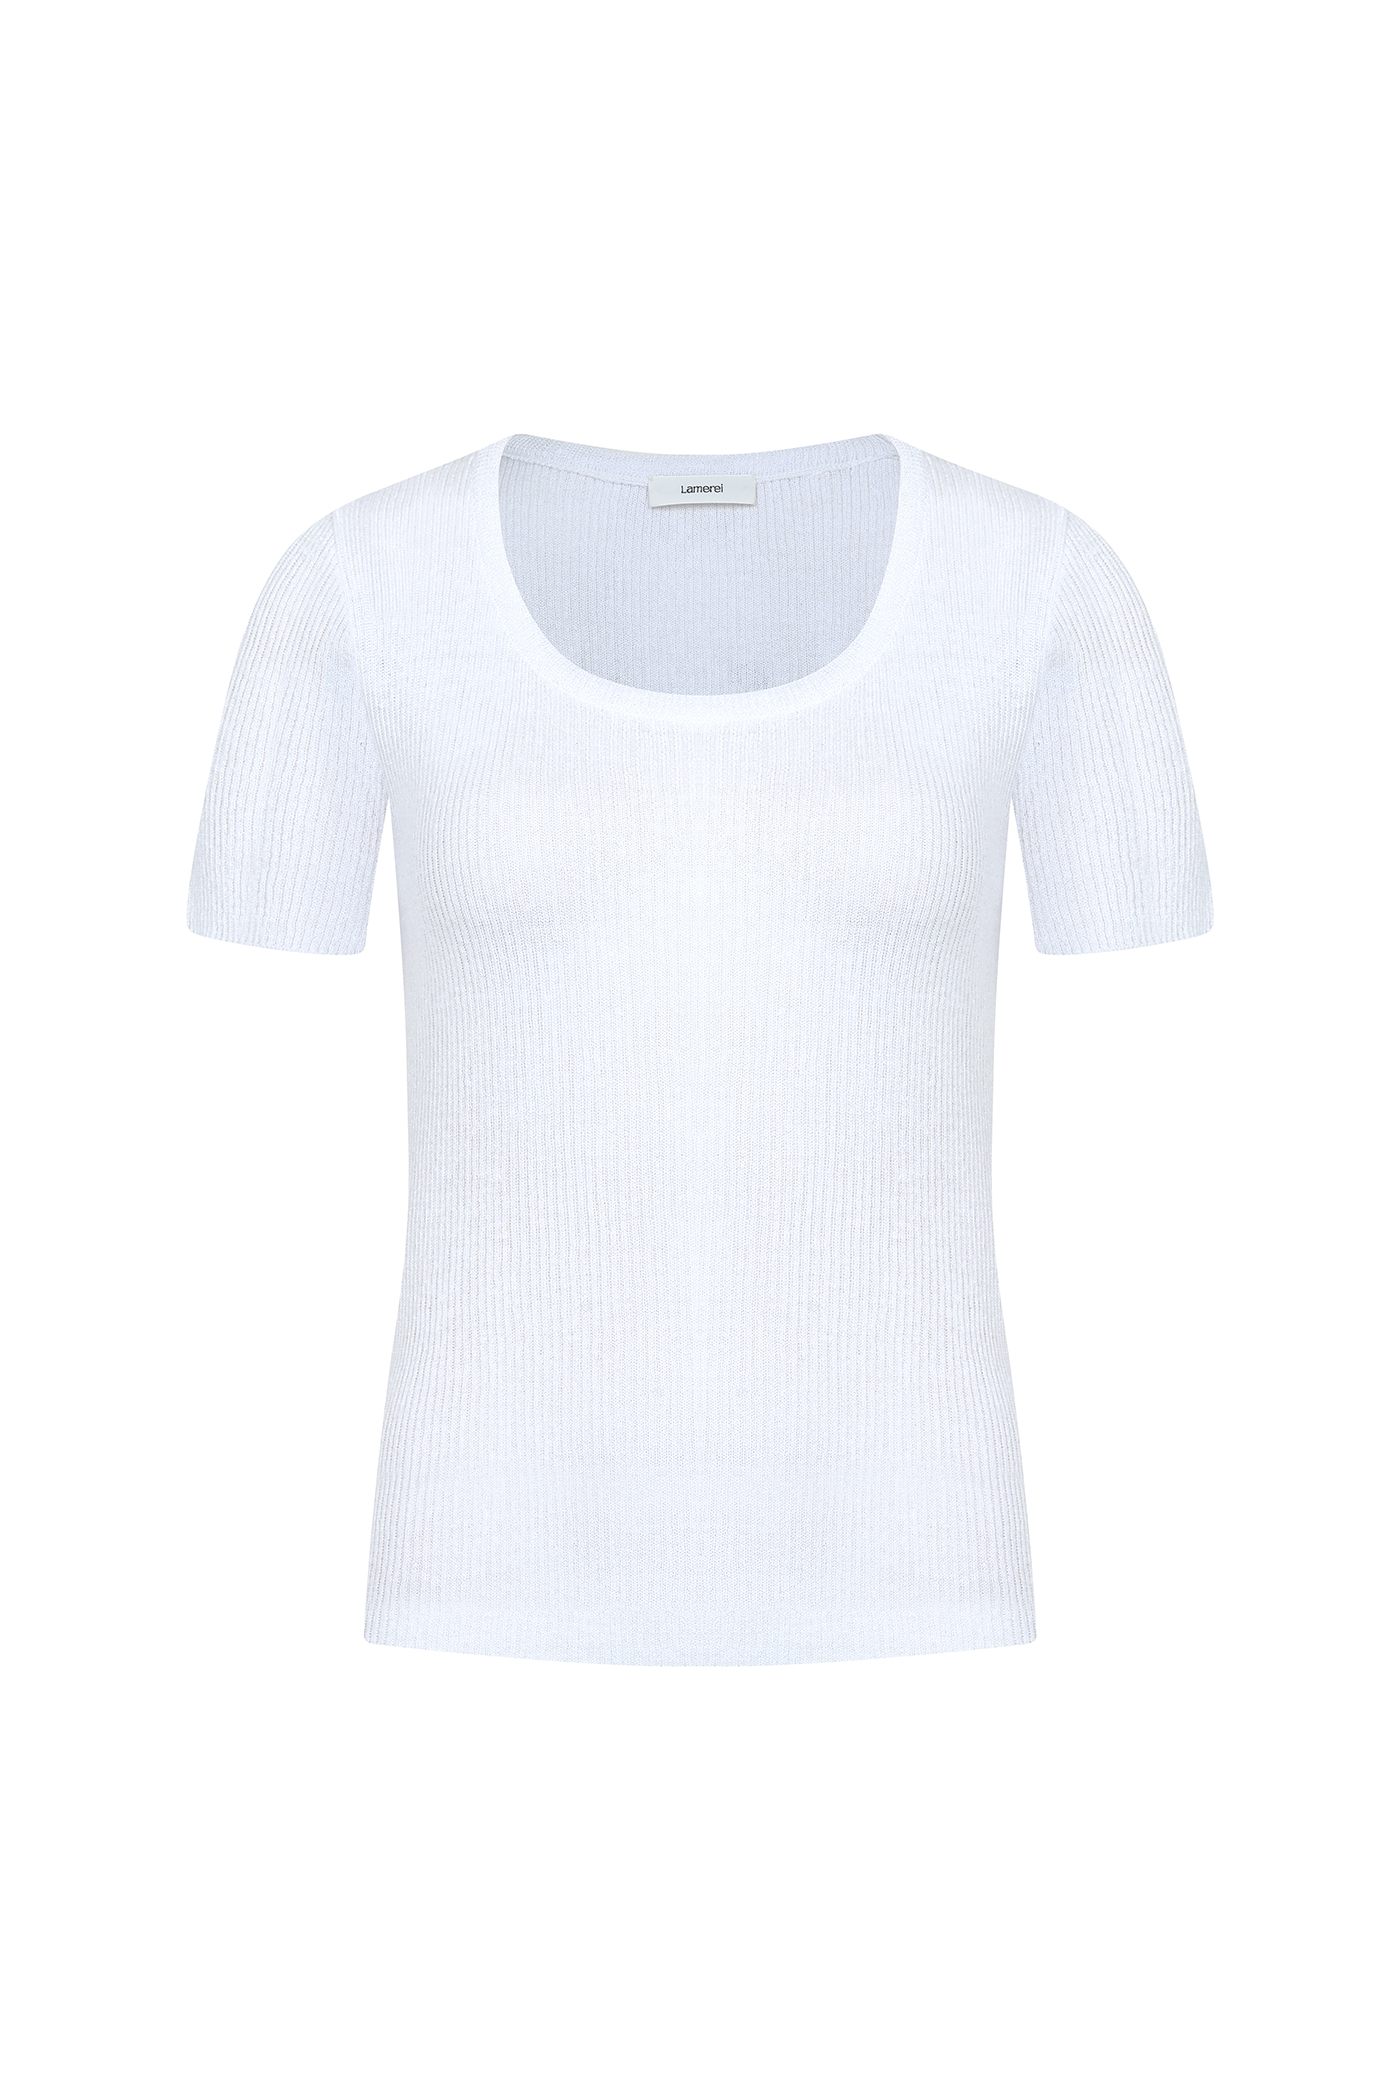 Linen Ribbed U-neck Knit Top[LMBCSUKN196]-4color